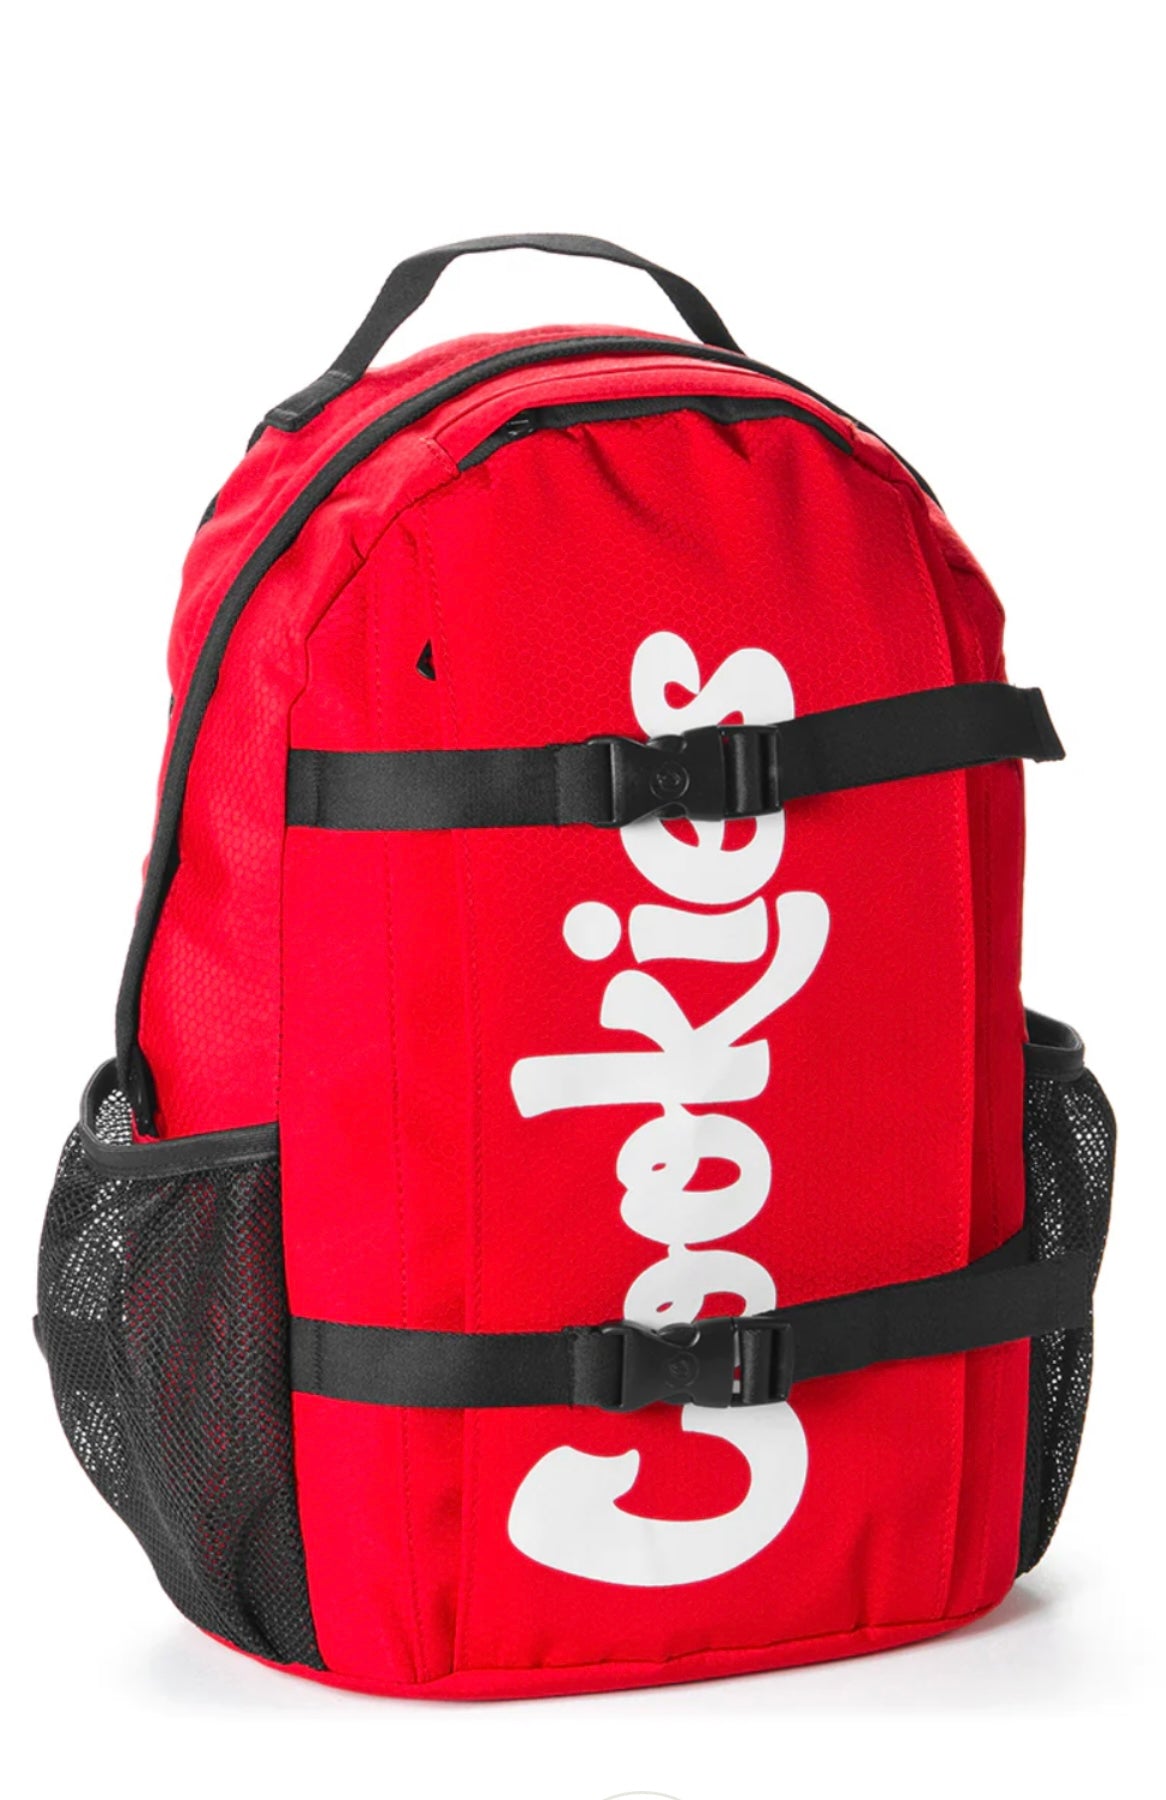 Cookies SF "Non-Standard Ripstop" smell proof backpack